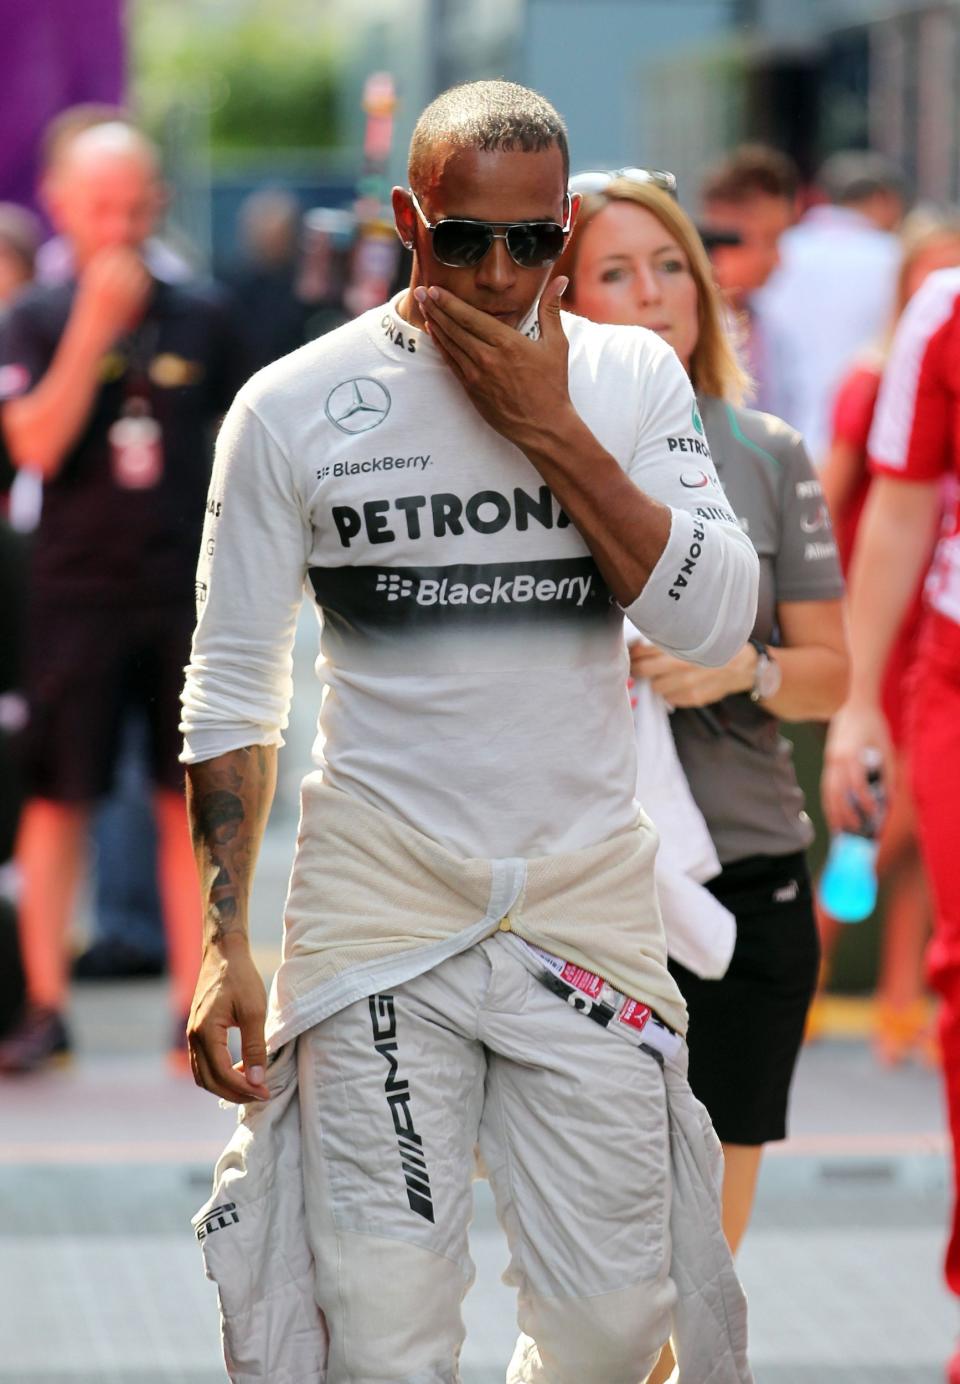 Mercedes' Lewis Hamilton makes his way back to the garage after going out in Q2 during qualifying day for the 2013 Italian Grand Prix at the Autodromo di Monza in Monza, Italy.